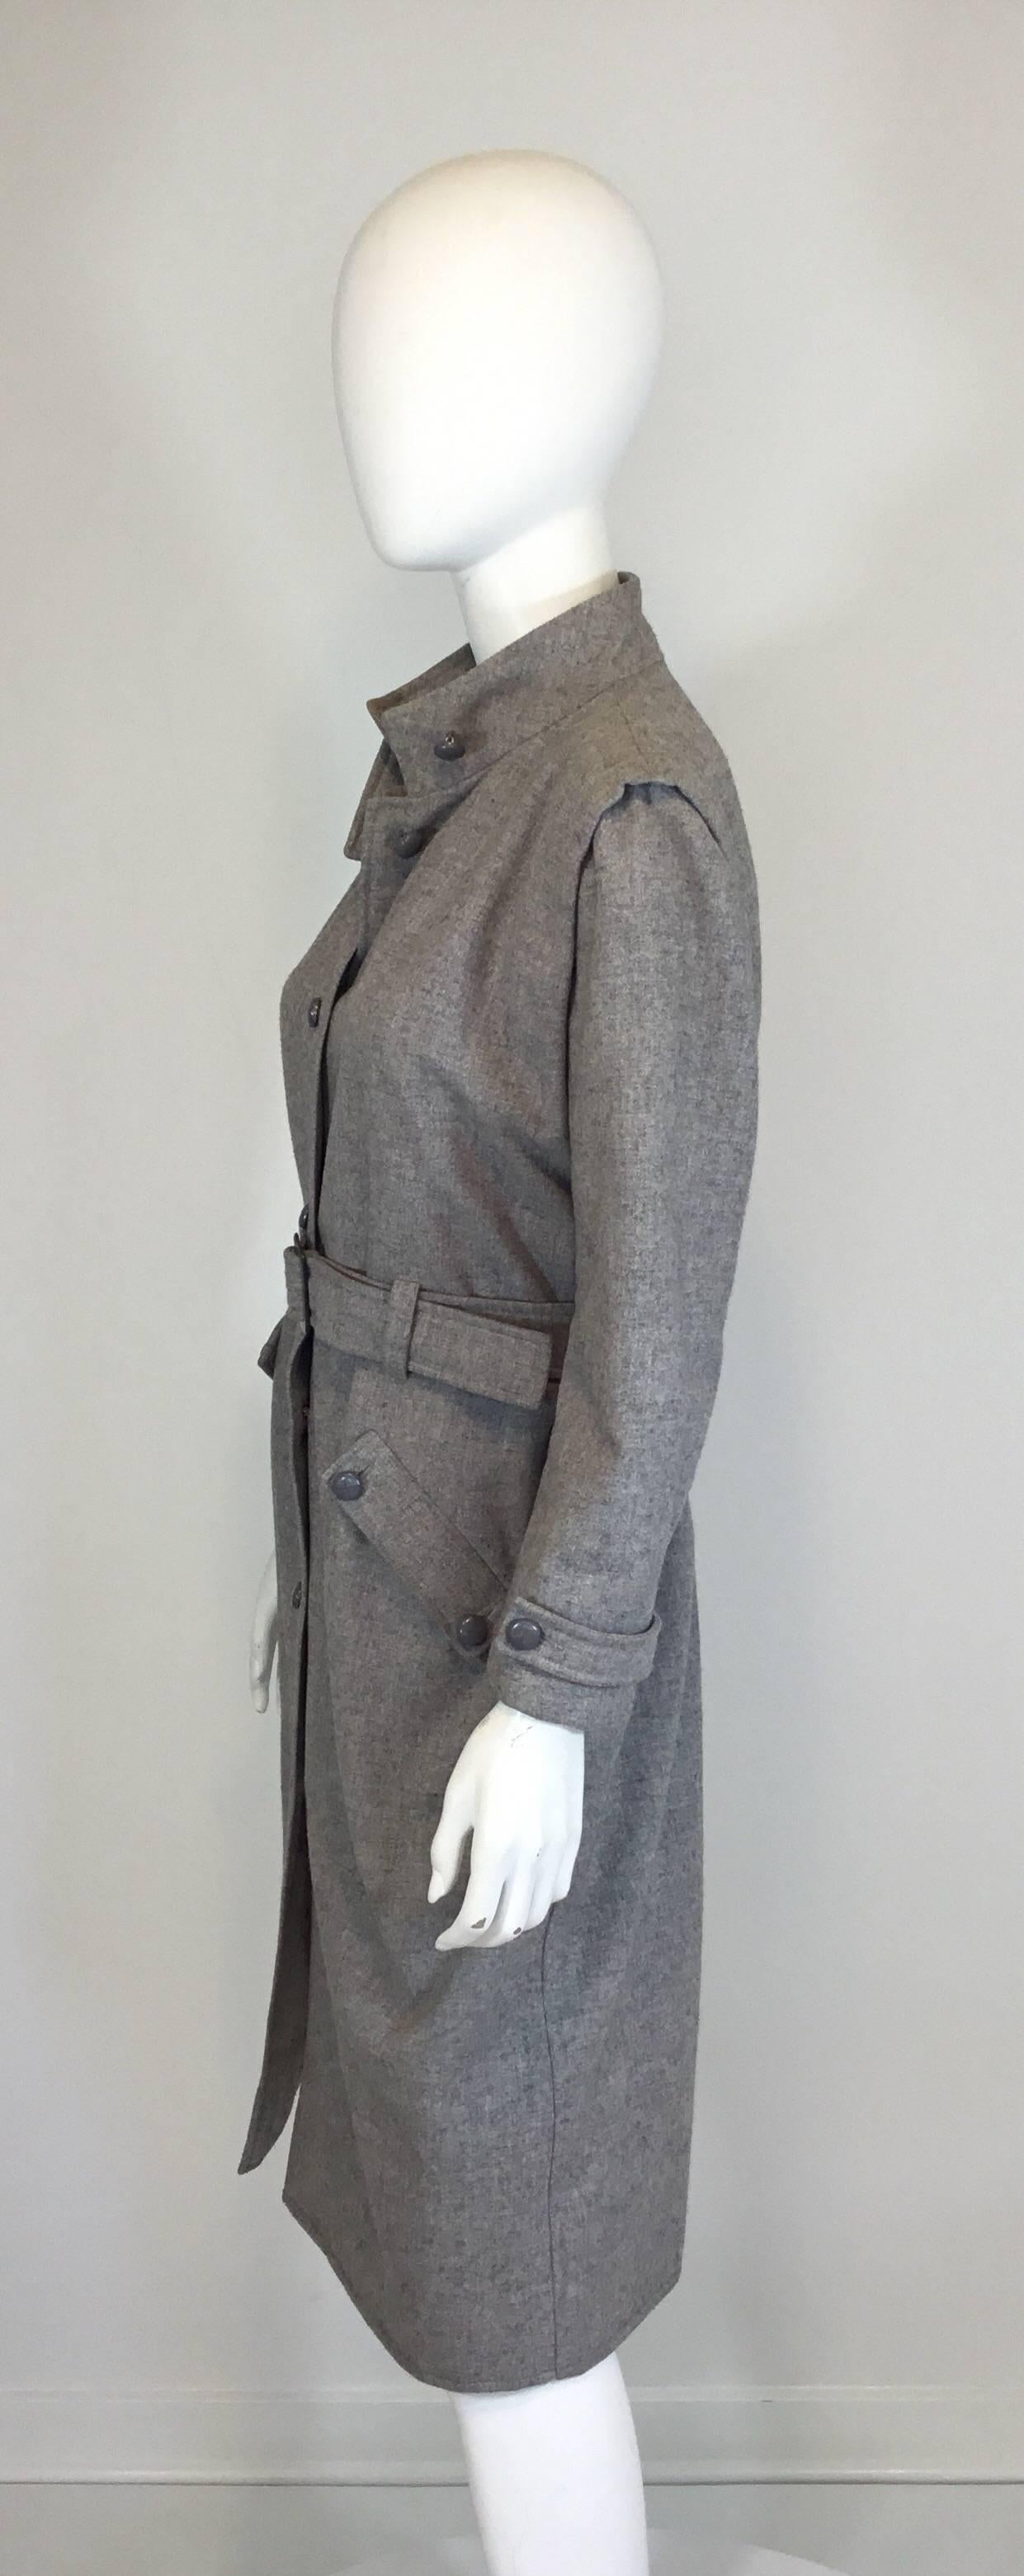 Vintage Andre Courreges coat made of 92% wool and 8% nylon with a button and belt closure, button pockets at the hips, and a full lining. Coat made in France.  Clean modern lines. Designer size 0 or modern size small. Measurements are:

Bust-